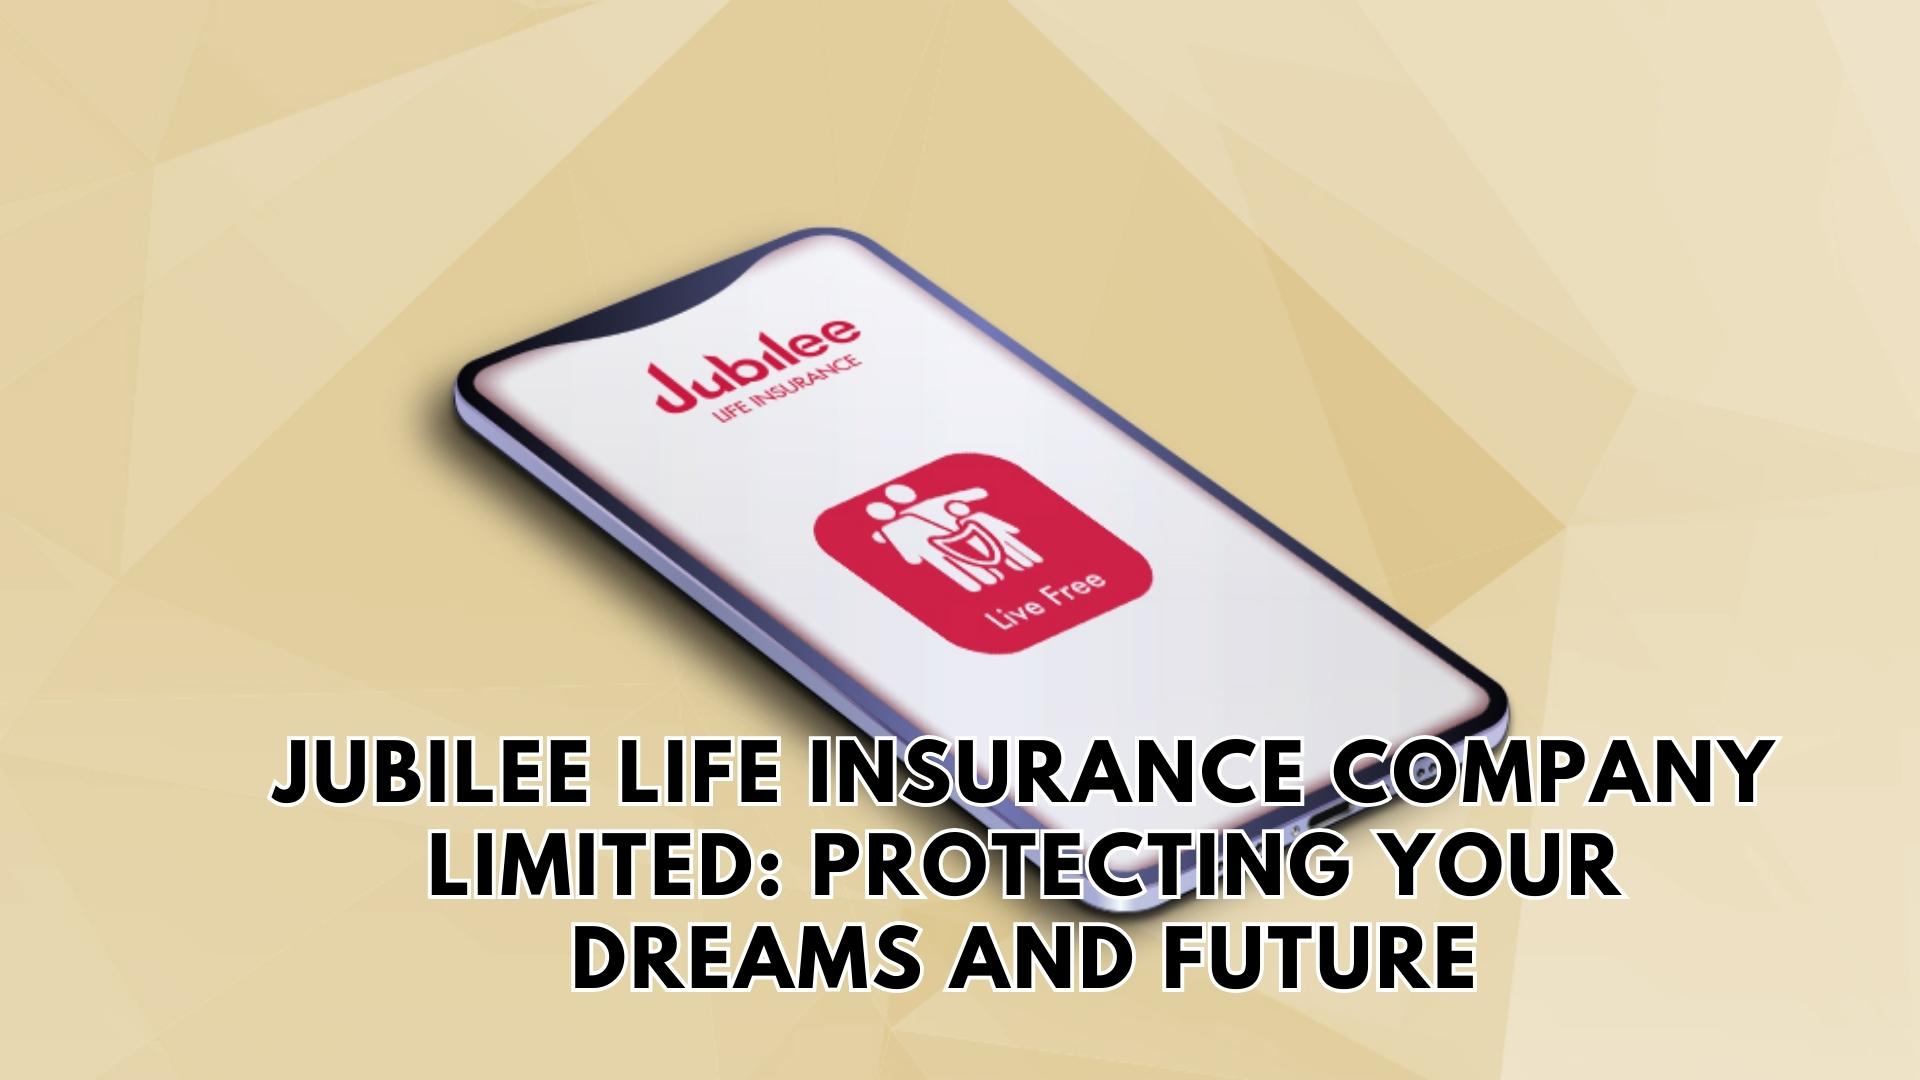 Jubilee Life Insurance Company Limited Protecting Your Dreams and Future